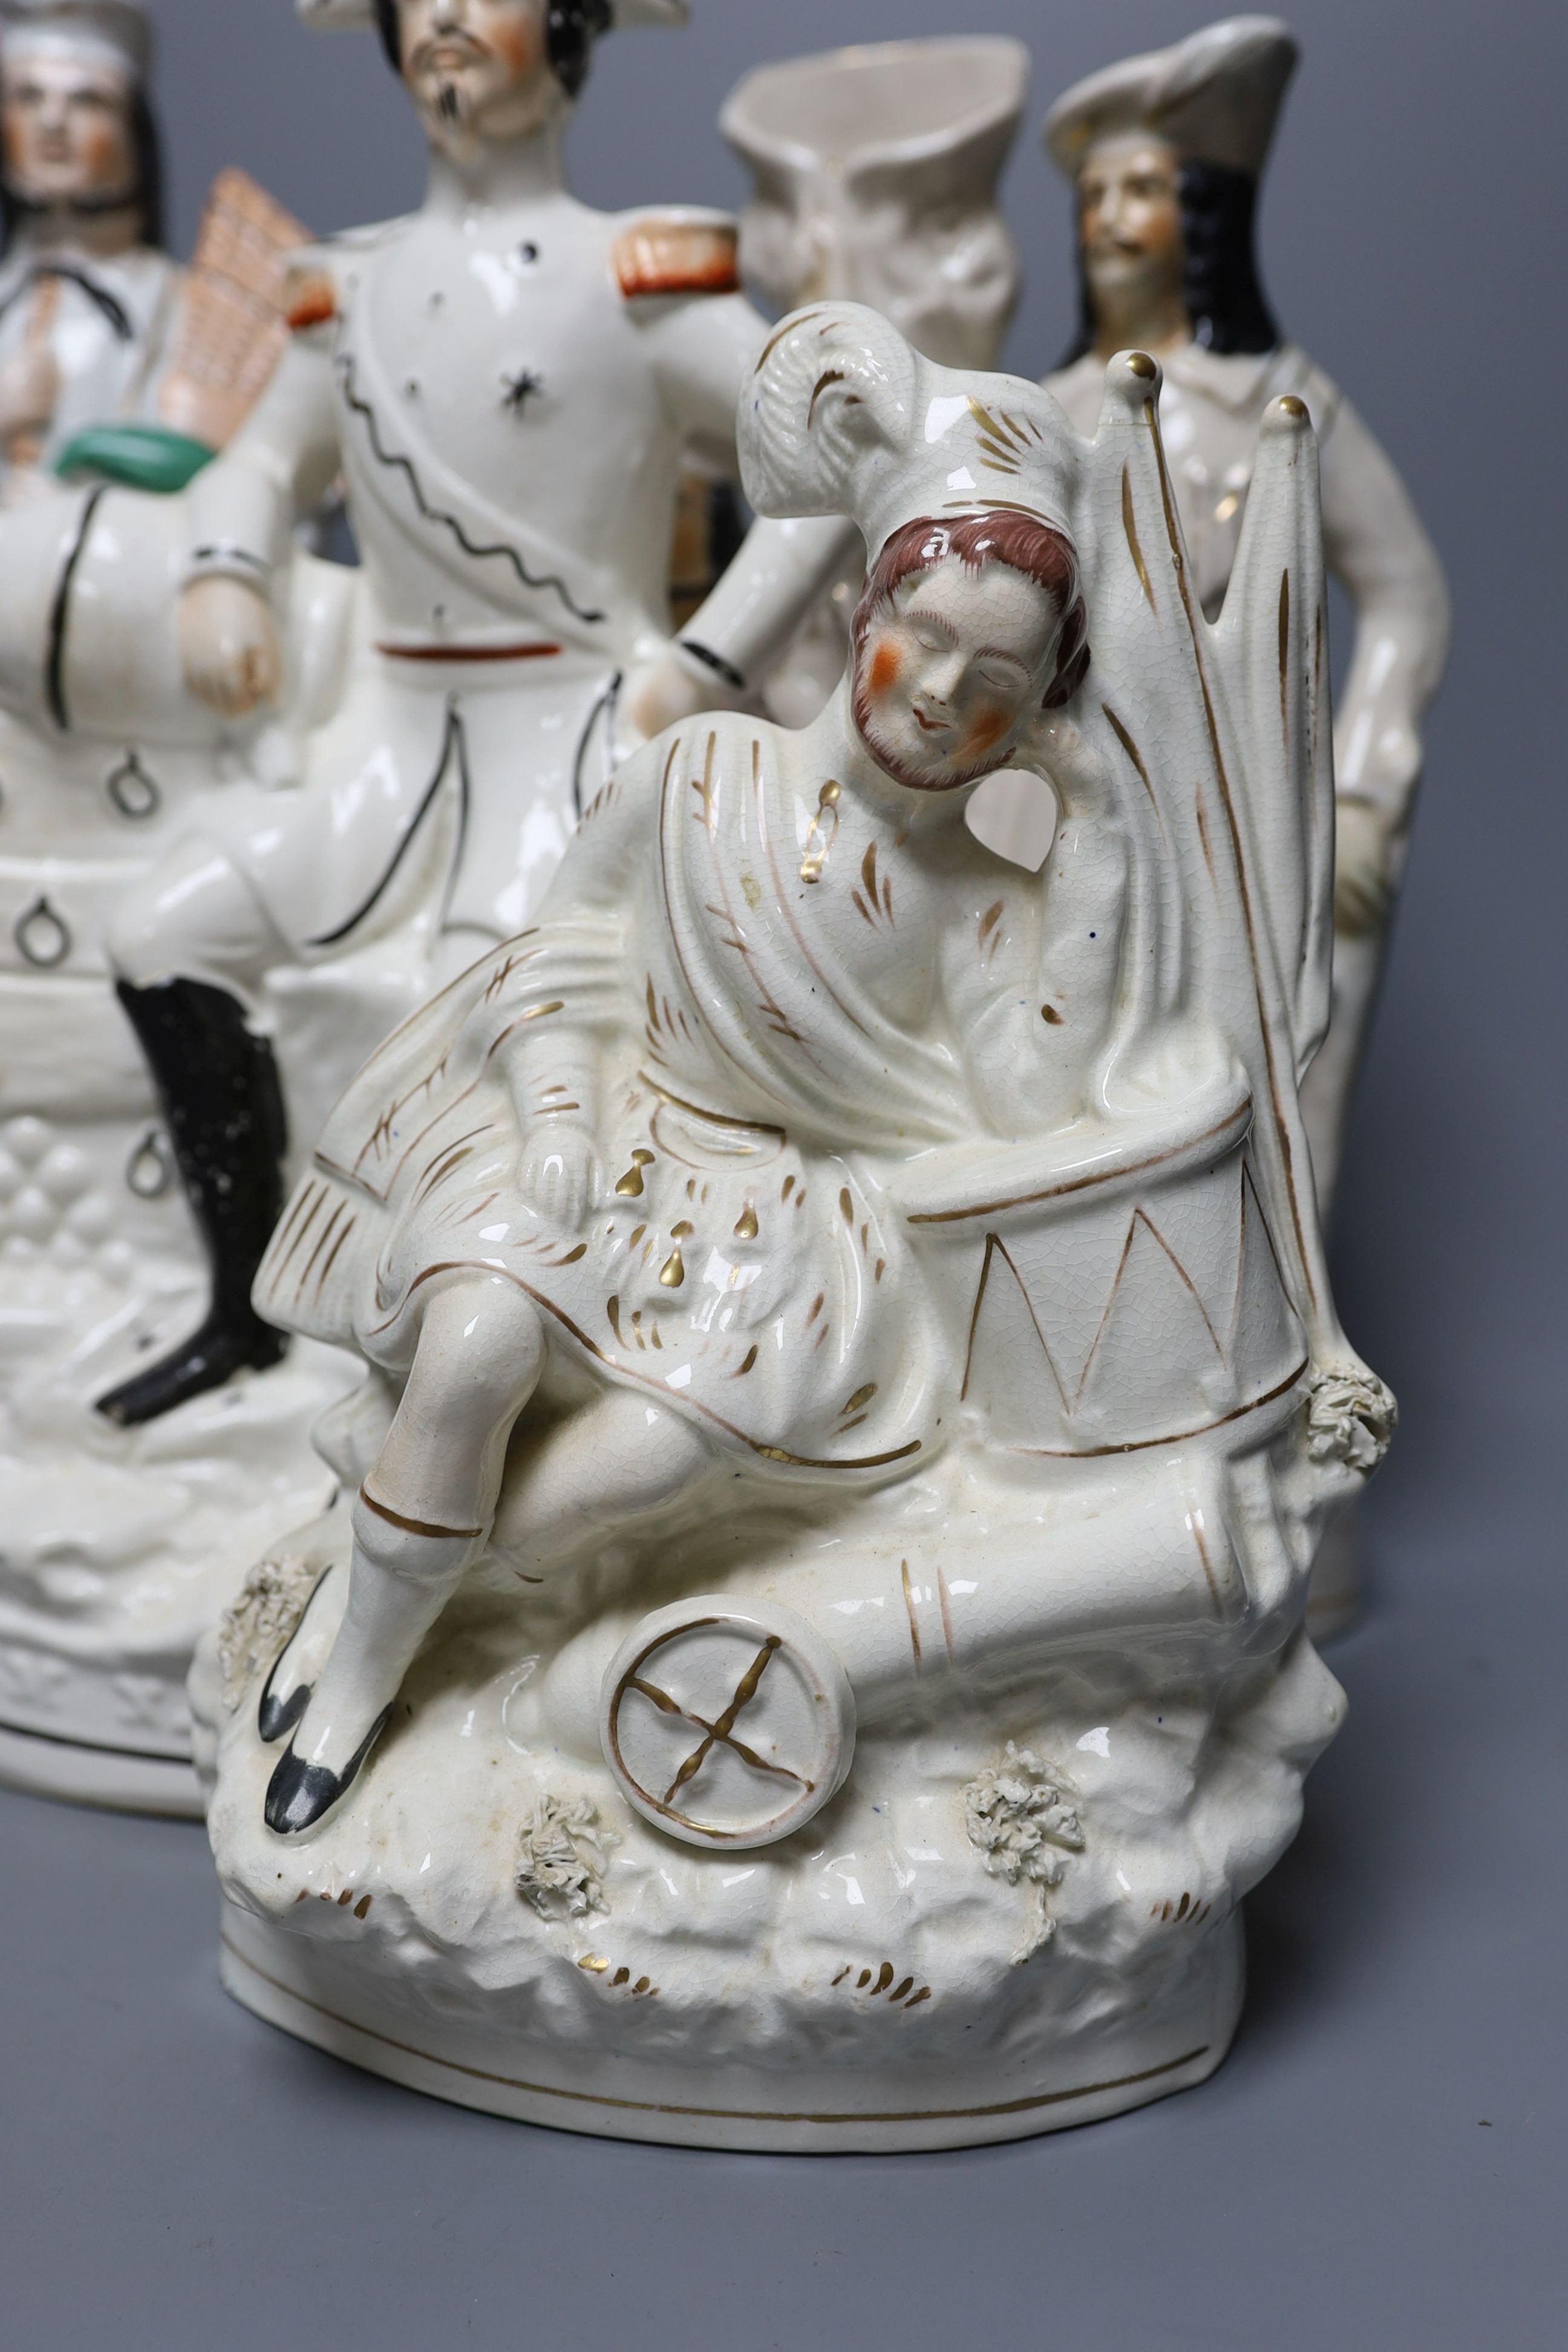 Four 19th century Staffordshire pottery groups - 40cm tall